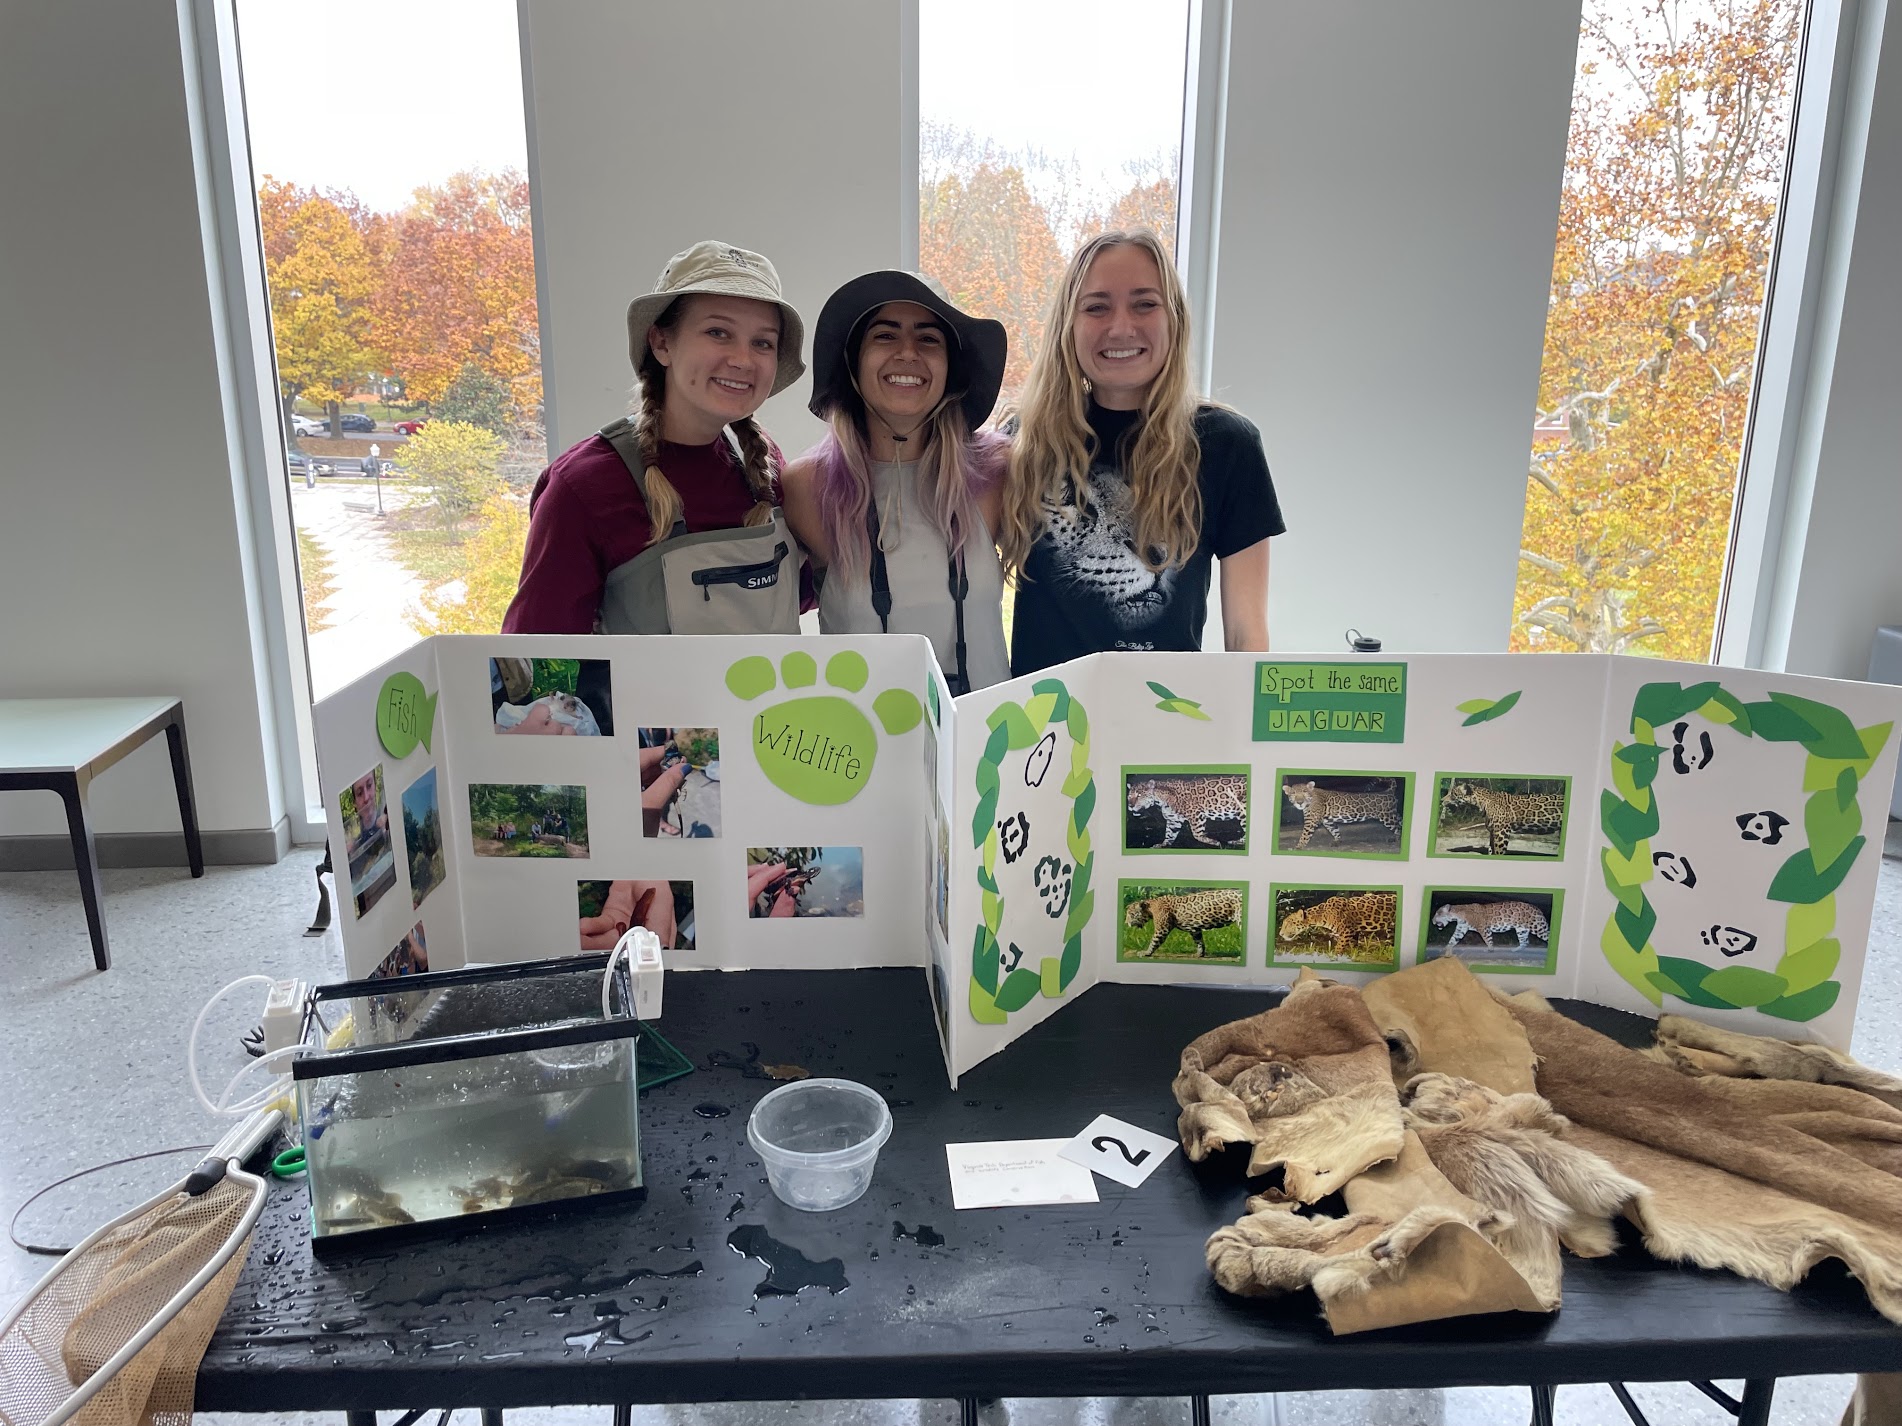 Three graduate students stand together and pose for a photo. On the table in front of them are two folding posters with photos of wildlife, an animal hide, and a small fish tank.